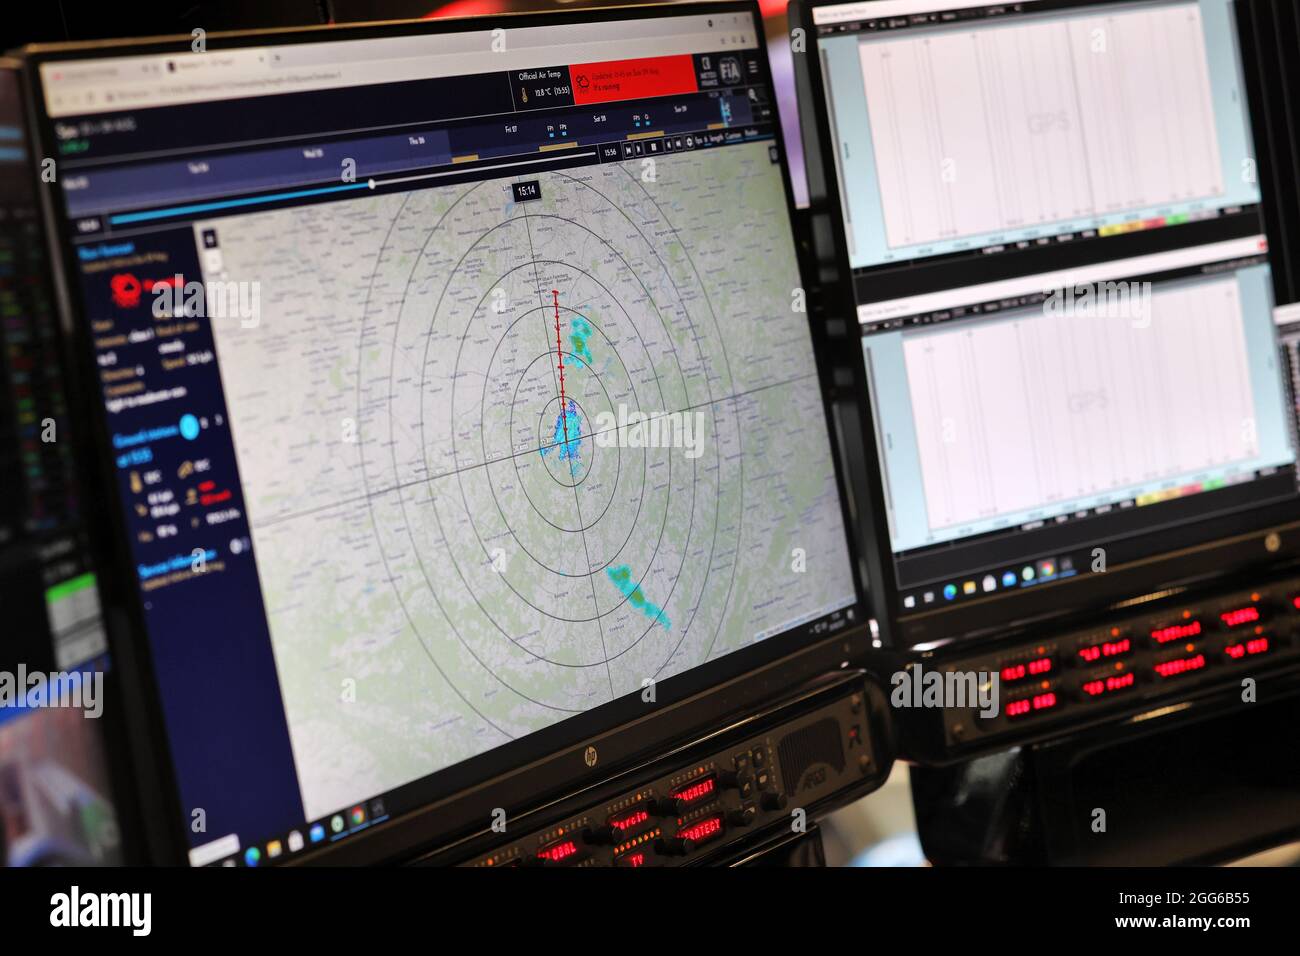 Alpine F1 Team - weather radar in the pits as the race is suspended.  Belgian Grand Prix, Sunday 29th August 2021. Spa-Francorchamps, Belgium  Stock Photo - Alamy